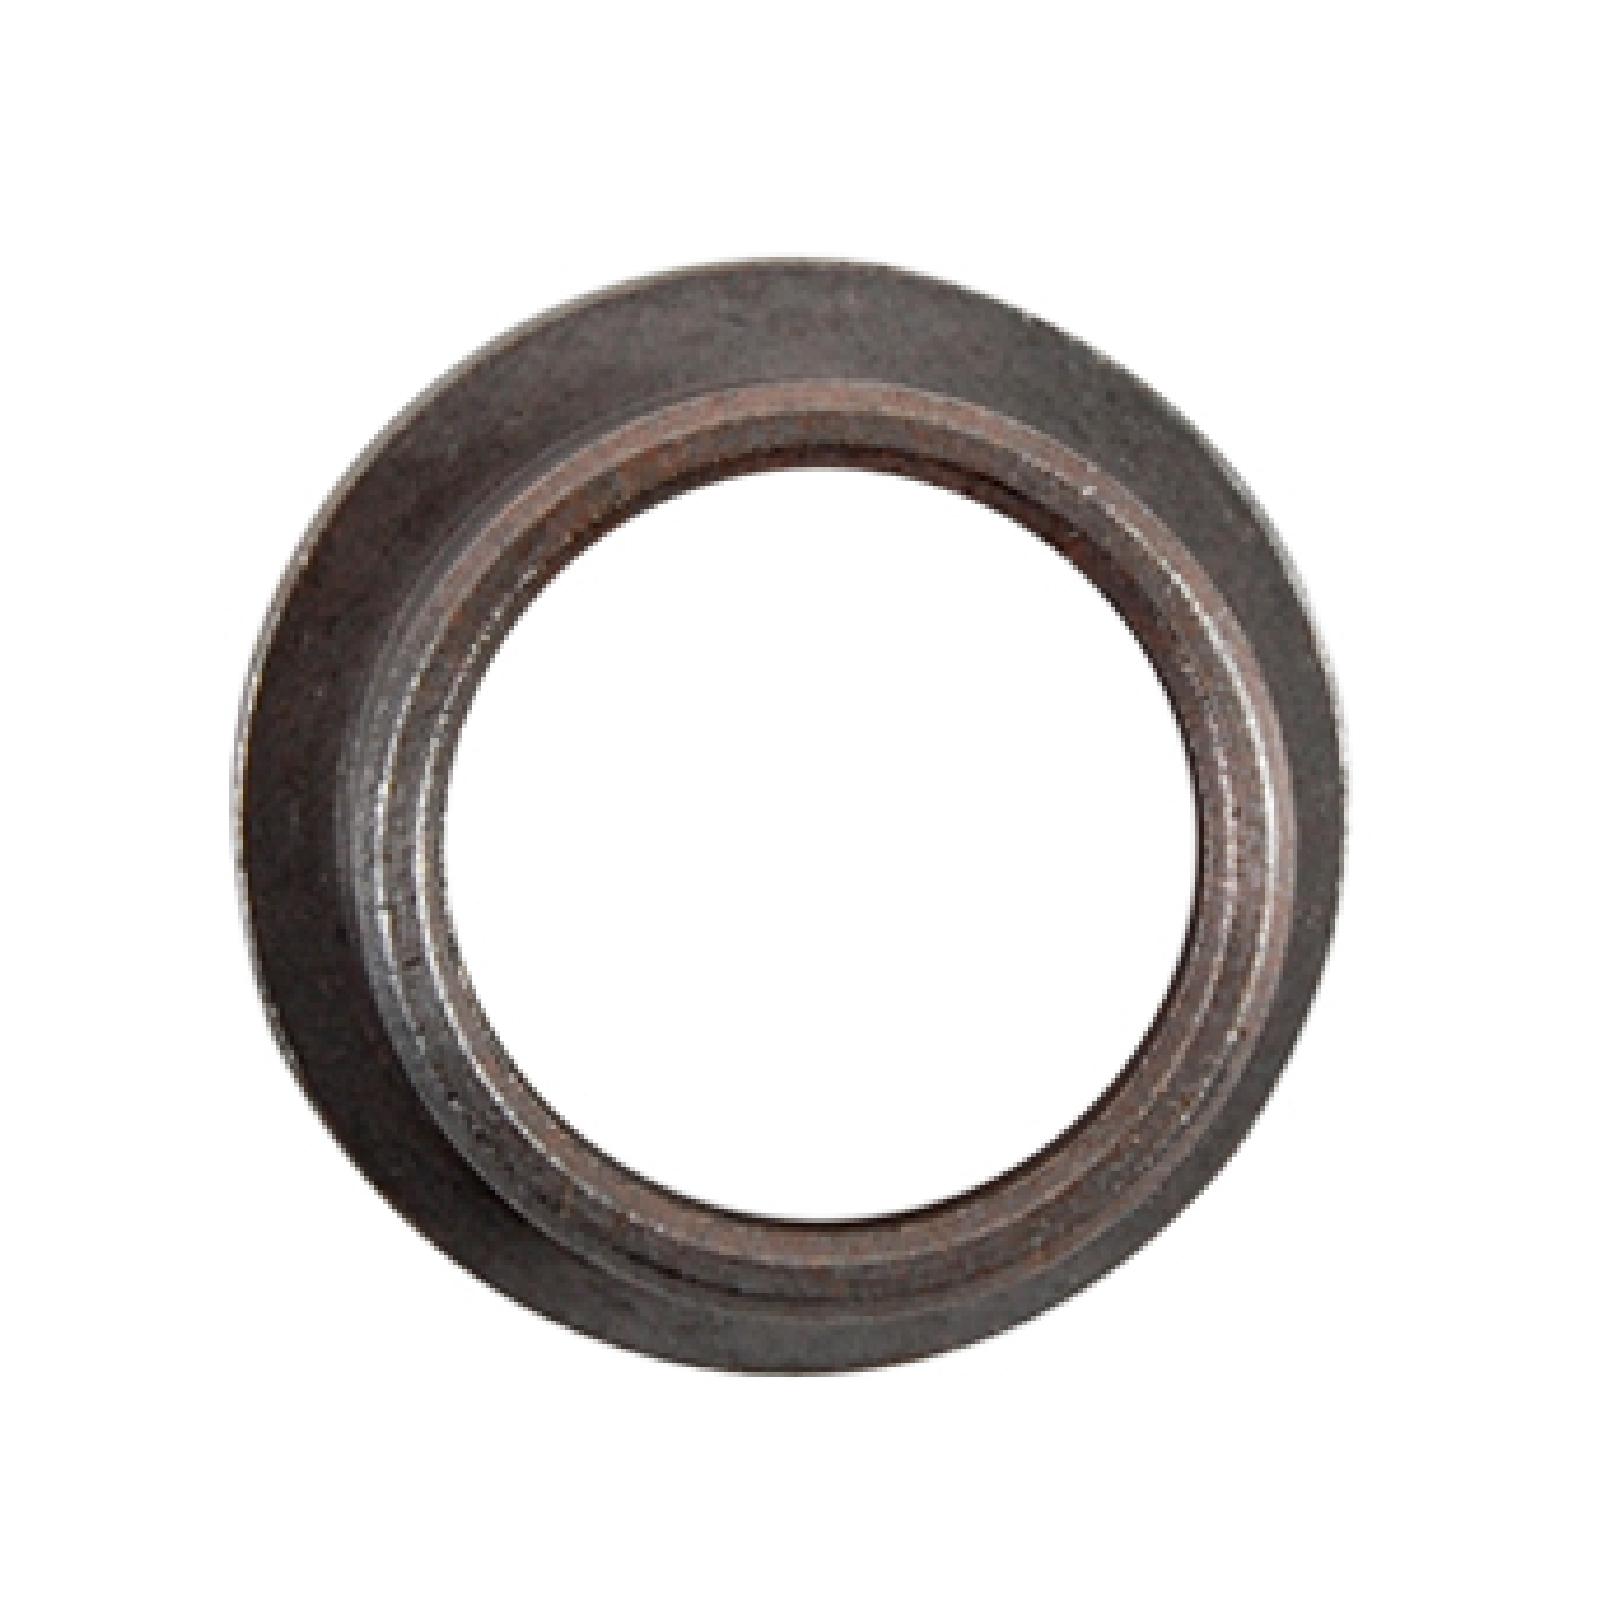 BEARING FLANGE part# 741-04488 by MTD